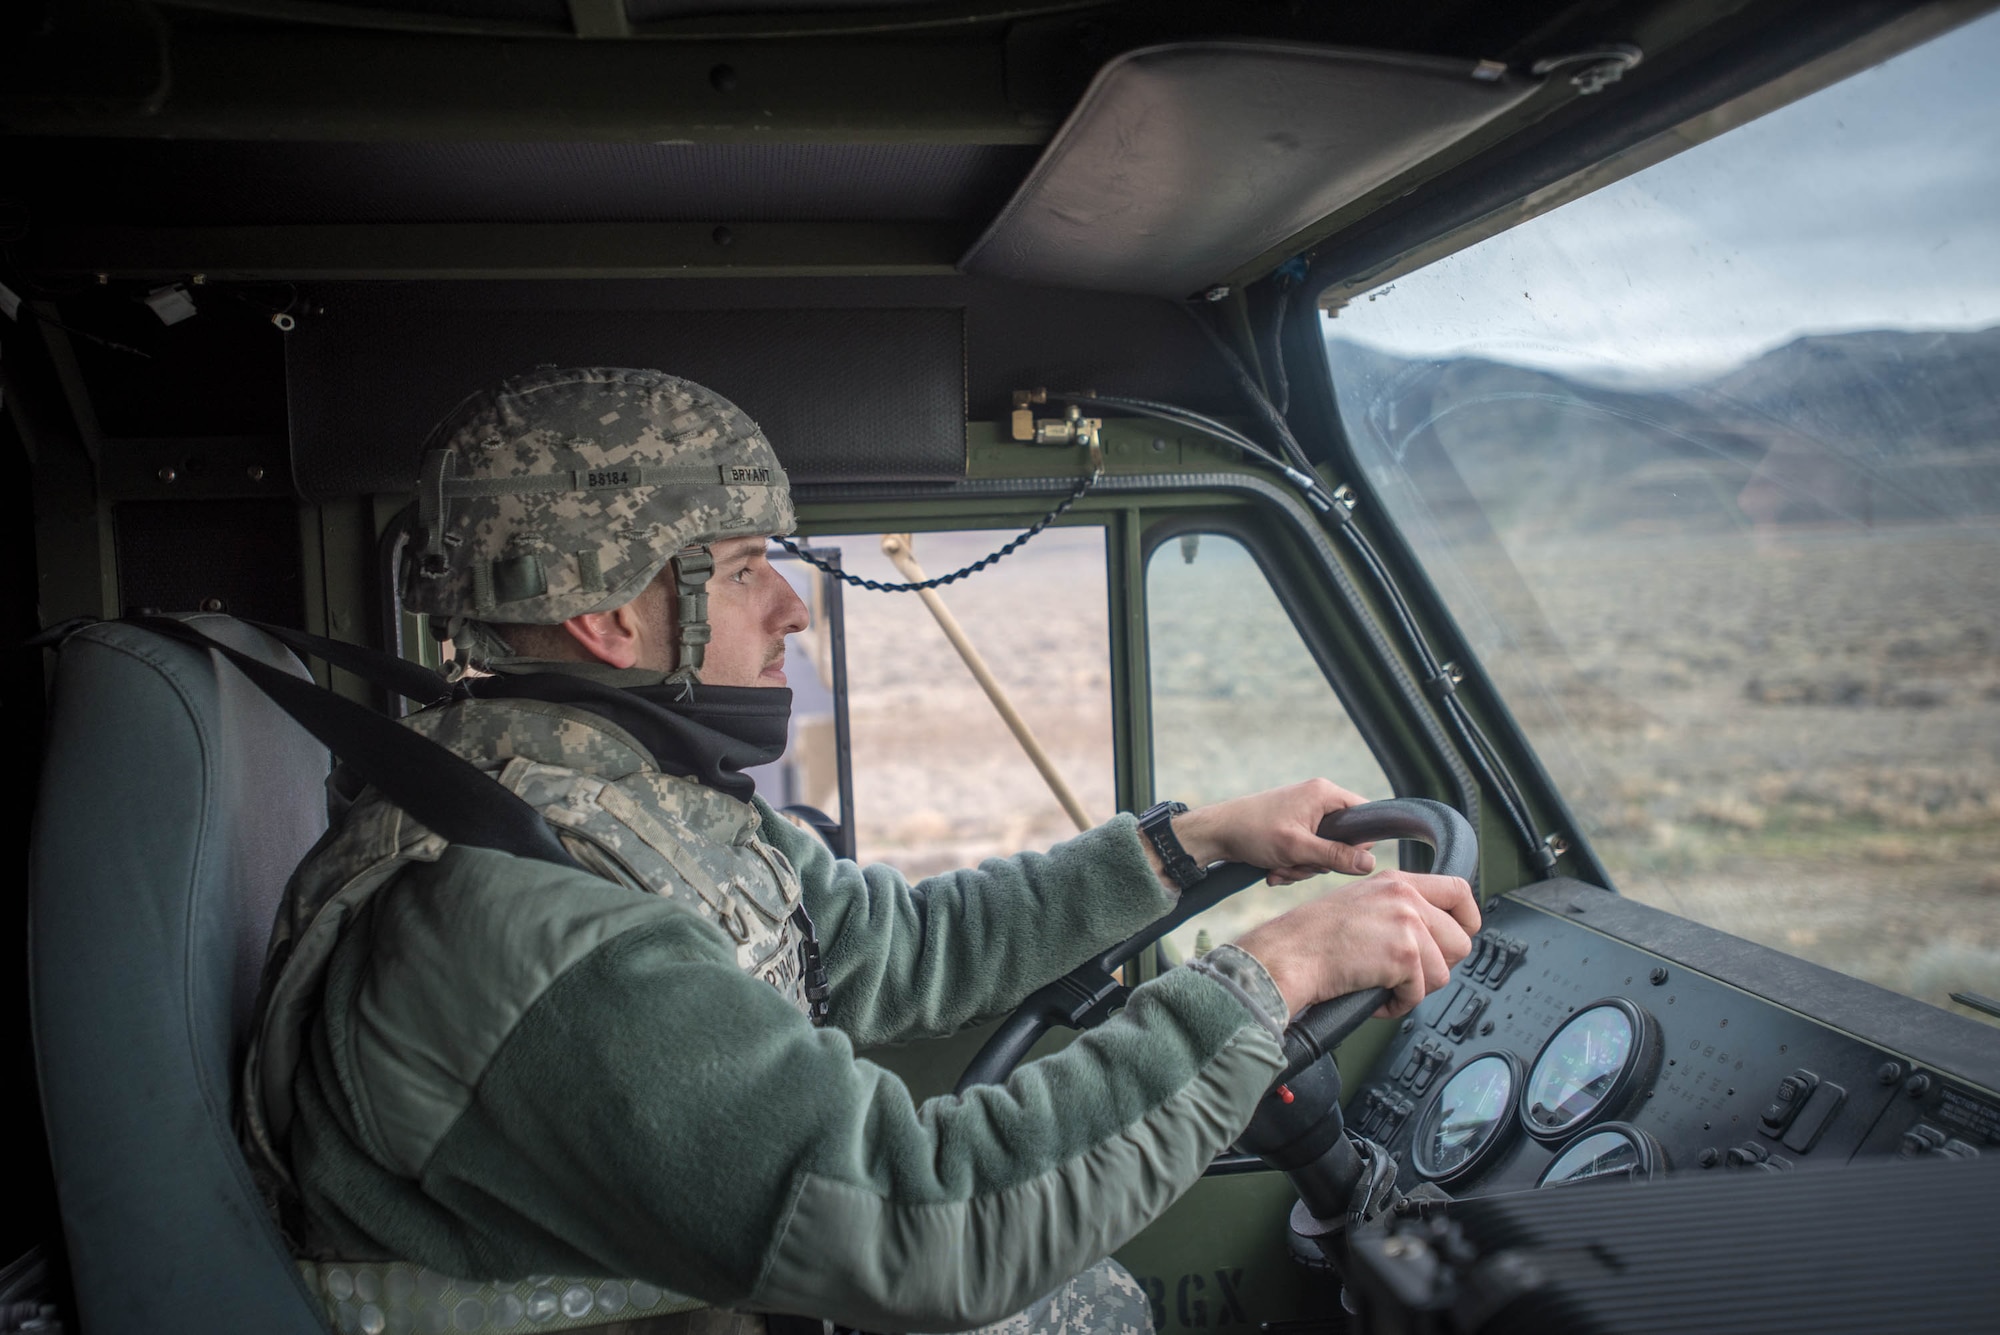 U.S. Army Spc. Anthony Bryant, a motor transport operator for the 688th Rapid Port Opening Element, drives a Load Handling System vehicle to transport cargo to the forward operating node at Amedee Army Airfield, Calif., on March 9, 2016. The 688th RPOE is working in conjunction with the Kentucky Air National Guard’s 123rd Contingency Response Group and a team from the Defense Logistics Agency to operate Joint Task Force-Port Opening Sangala during a week-long exercise called Operation Lumberjack. The objective of the JTF-PO is to establish an aerial port of debarkation, provide initial distribution capability and set up warehousing for distribution beyond the forward node. (Kentucky Air National Guard photo by Master Sgt. Phil Speck)